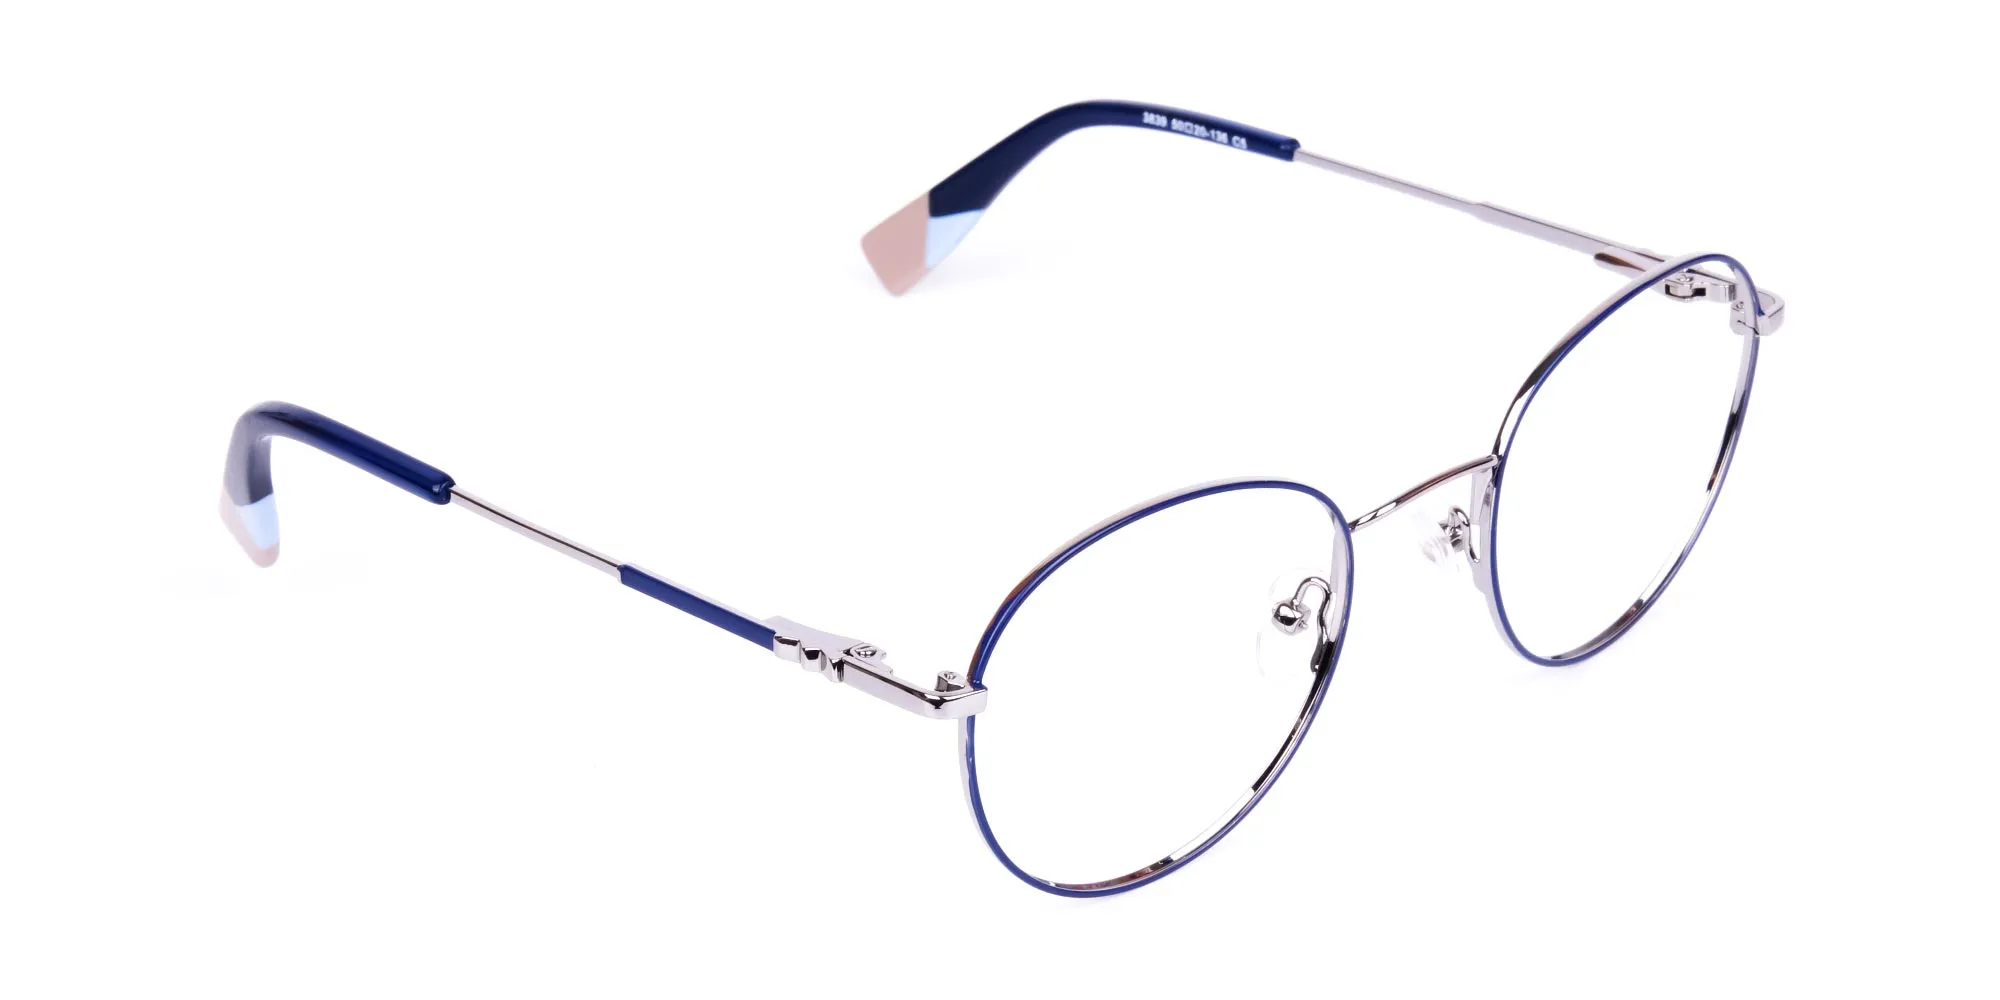 Dark Navy Blue and Silver Round Glasses-2